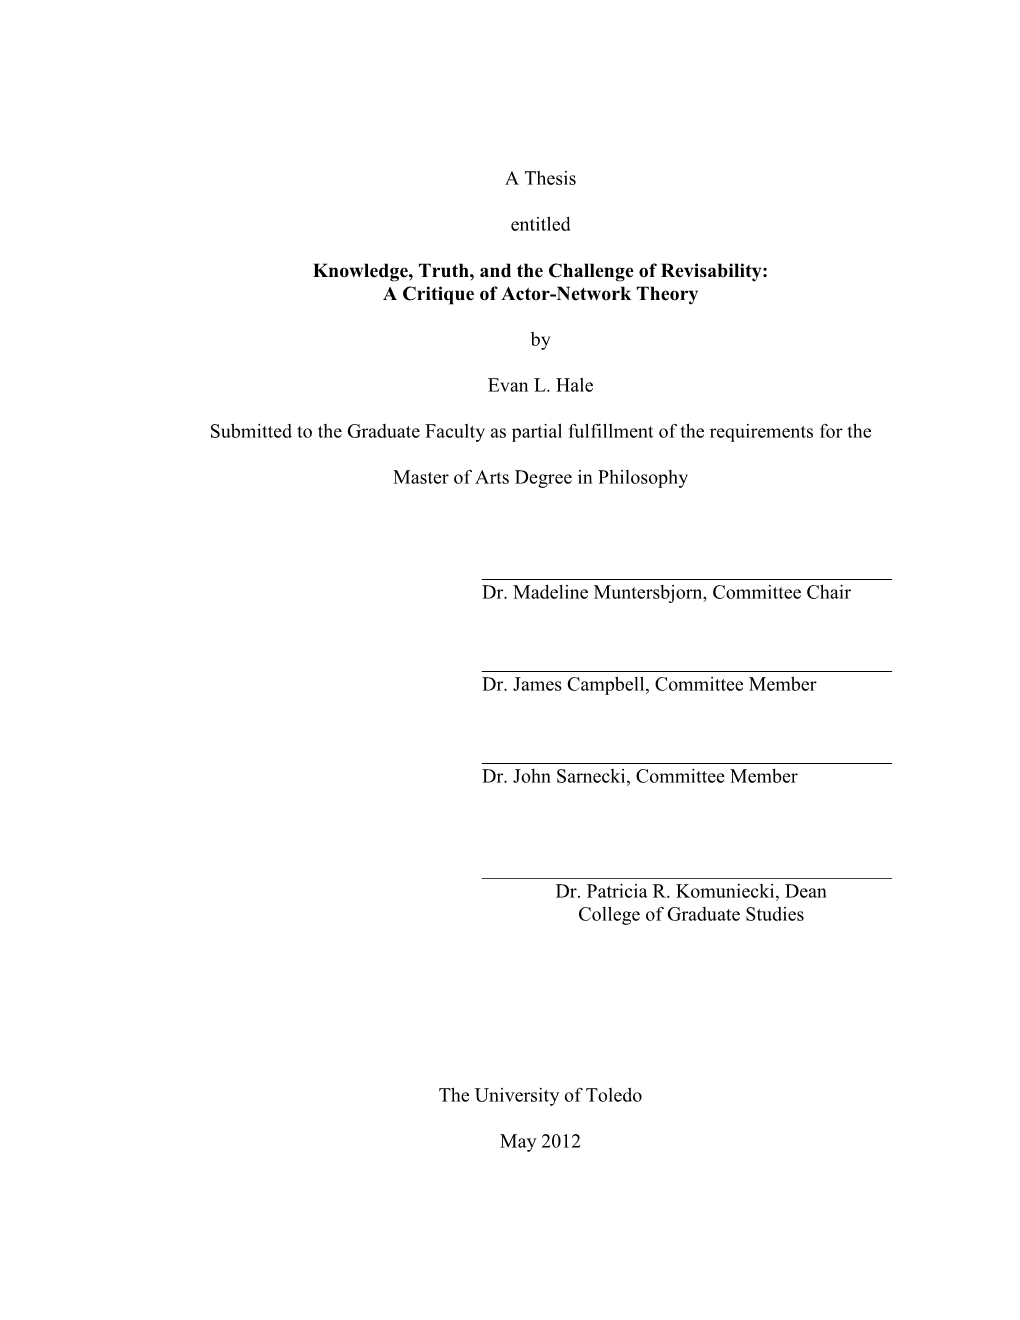 A Thesis Entitled Knowledge, Truth, and the Challenge of Revisability